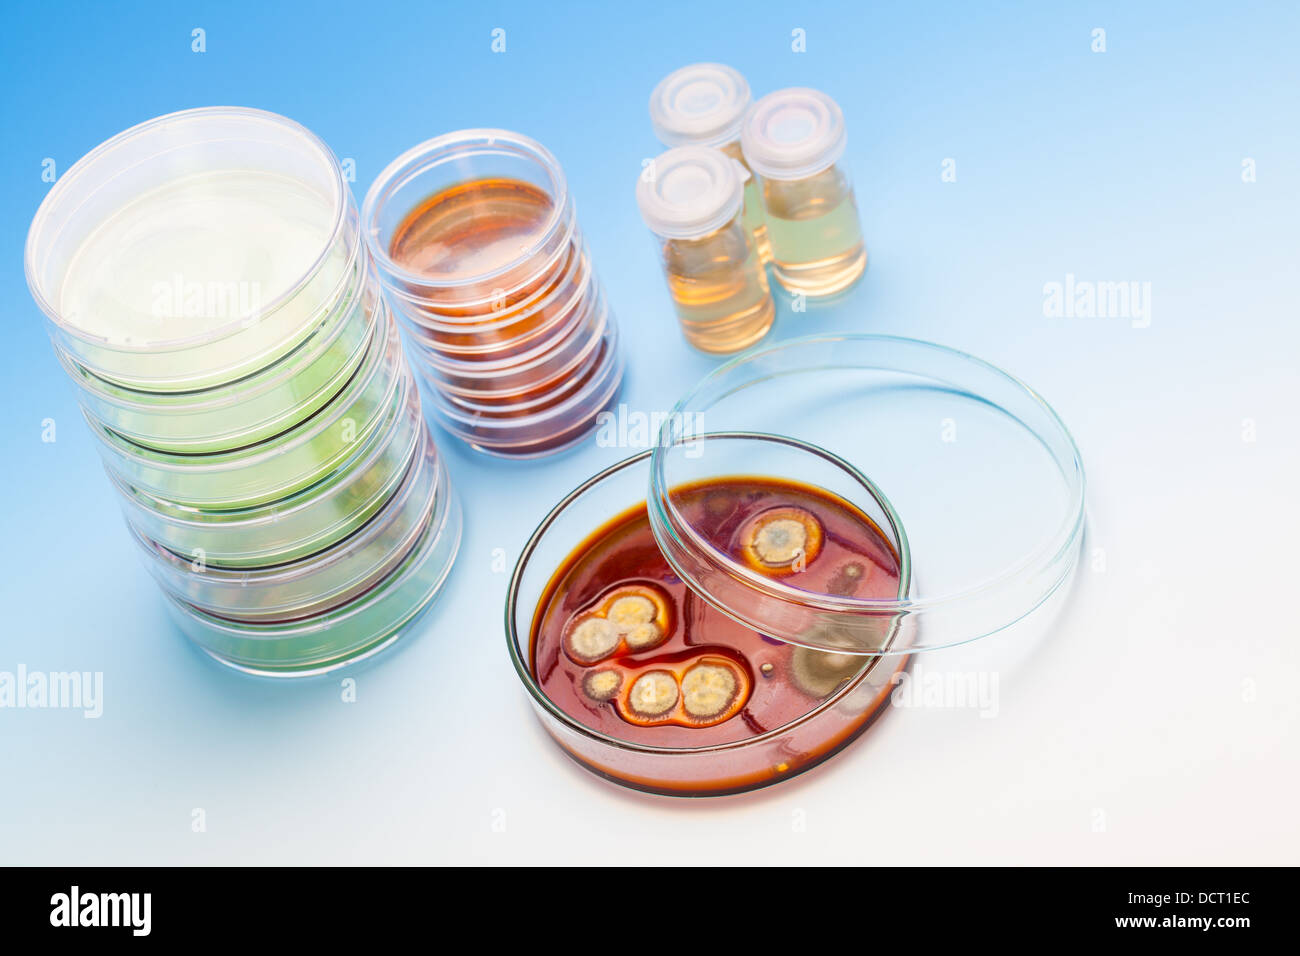 Petri dish with colonies of microorganisms Stock Photo